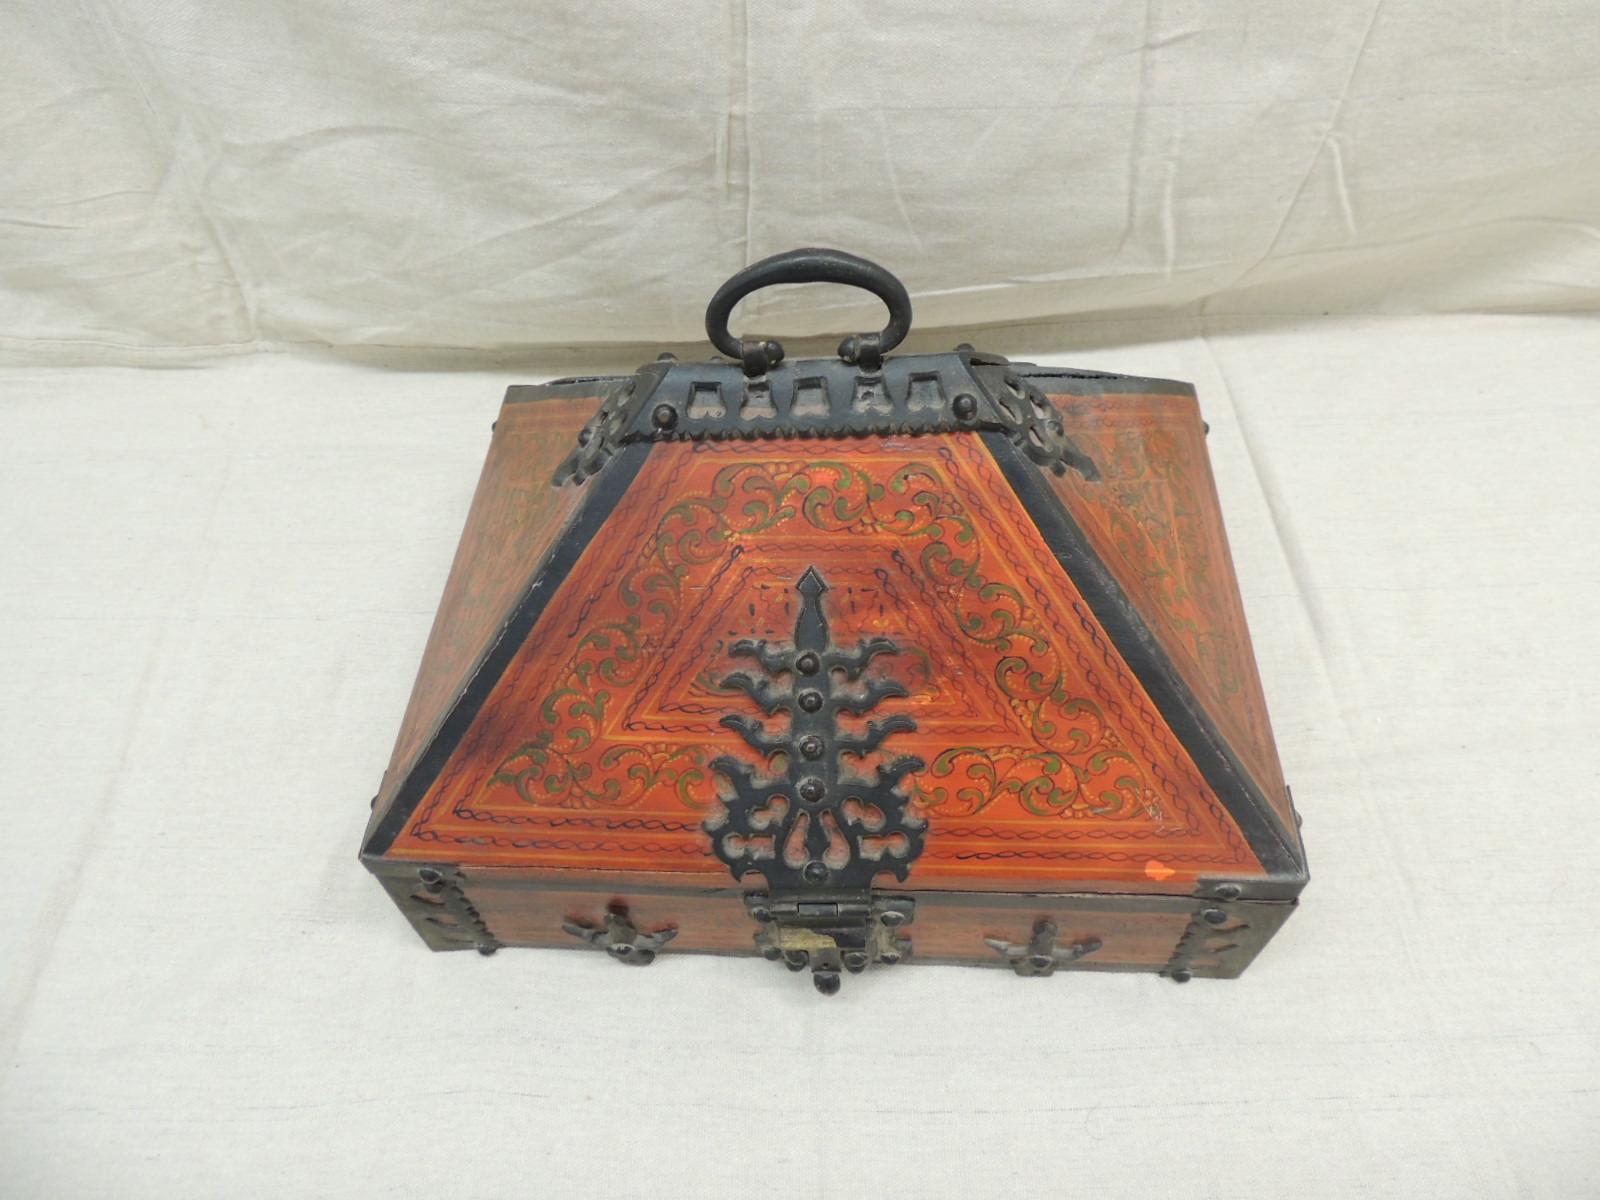 Hand painted Indian decorative box with hand forged iron details
Hidden compartment inside with conical shape top.
Karala - Nettur - Petti
Measures: 14” W x 10.5” D x 11” H.
        